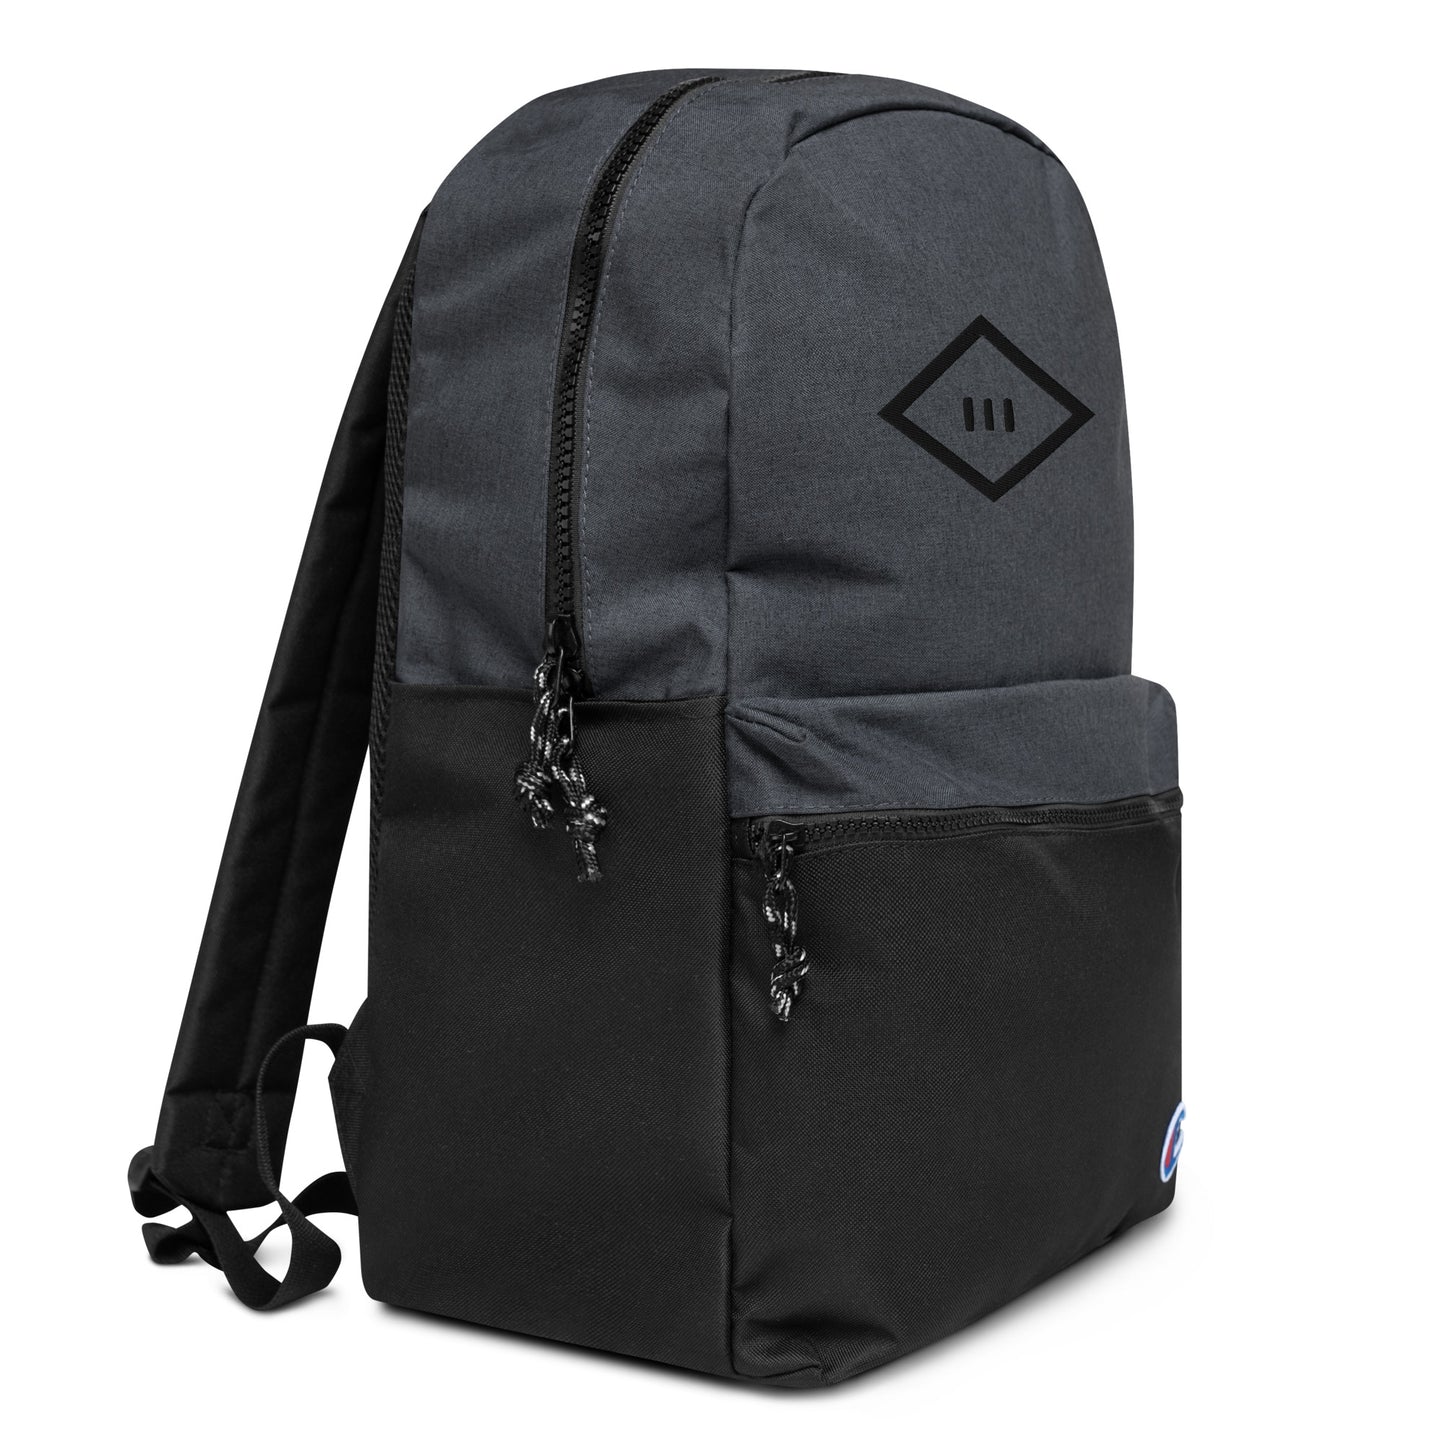 RUGBYNATION x CHAMPION Backpack